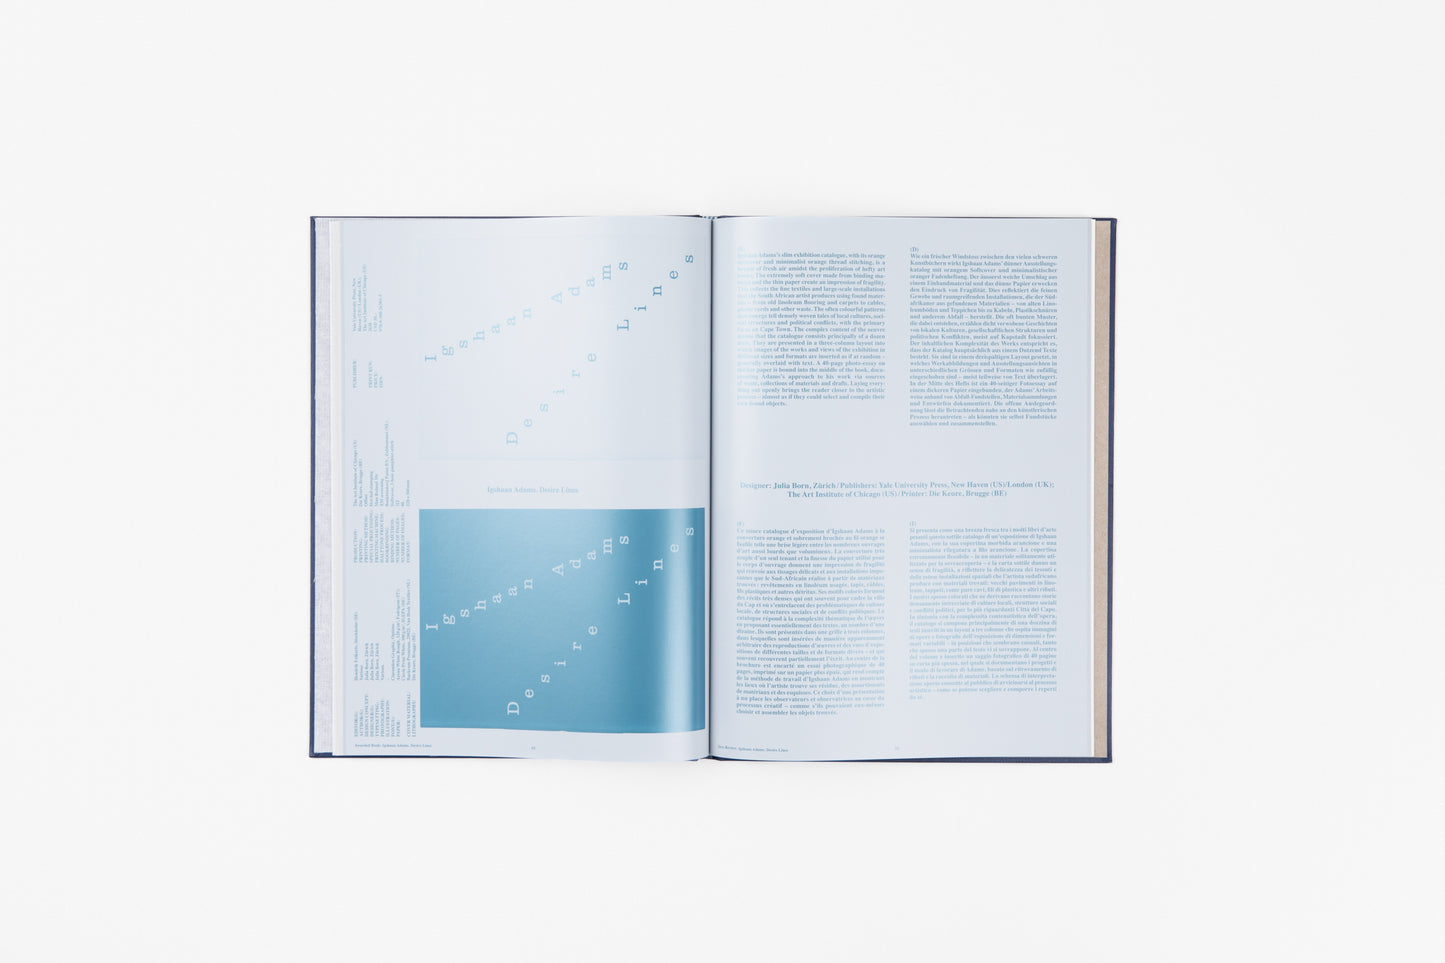 The Most Beautiful Swiss Books 2022 - The Producers' Issue